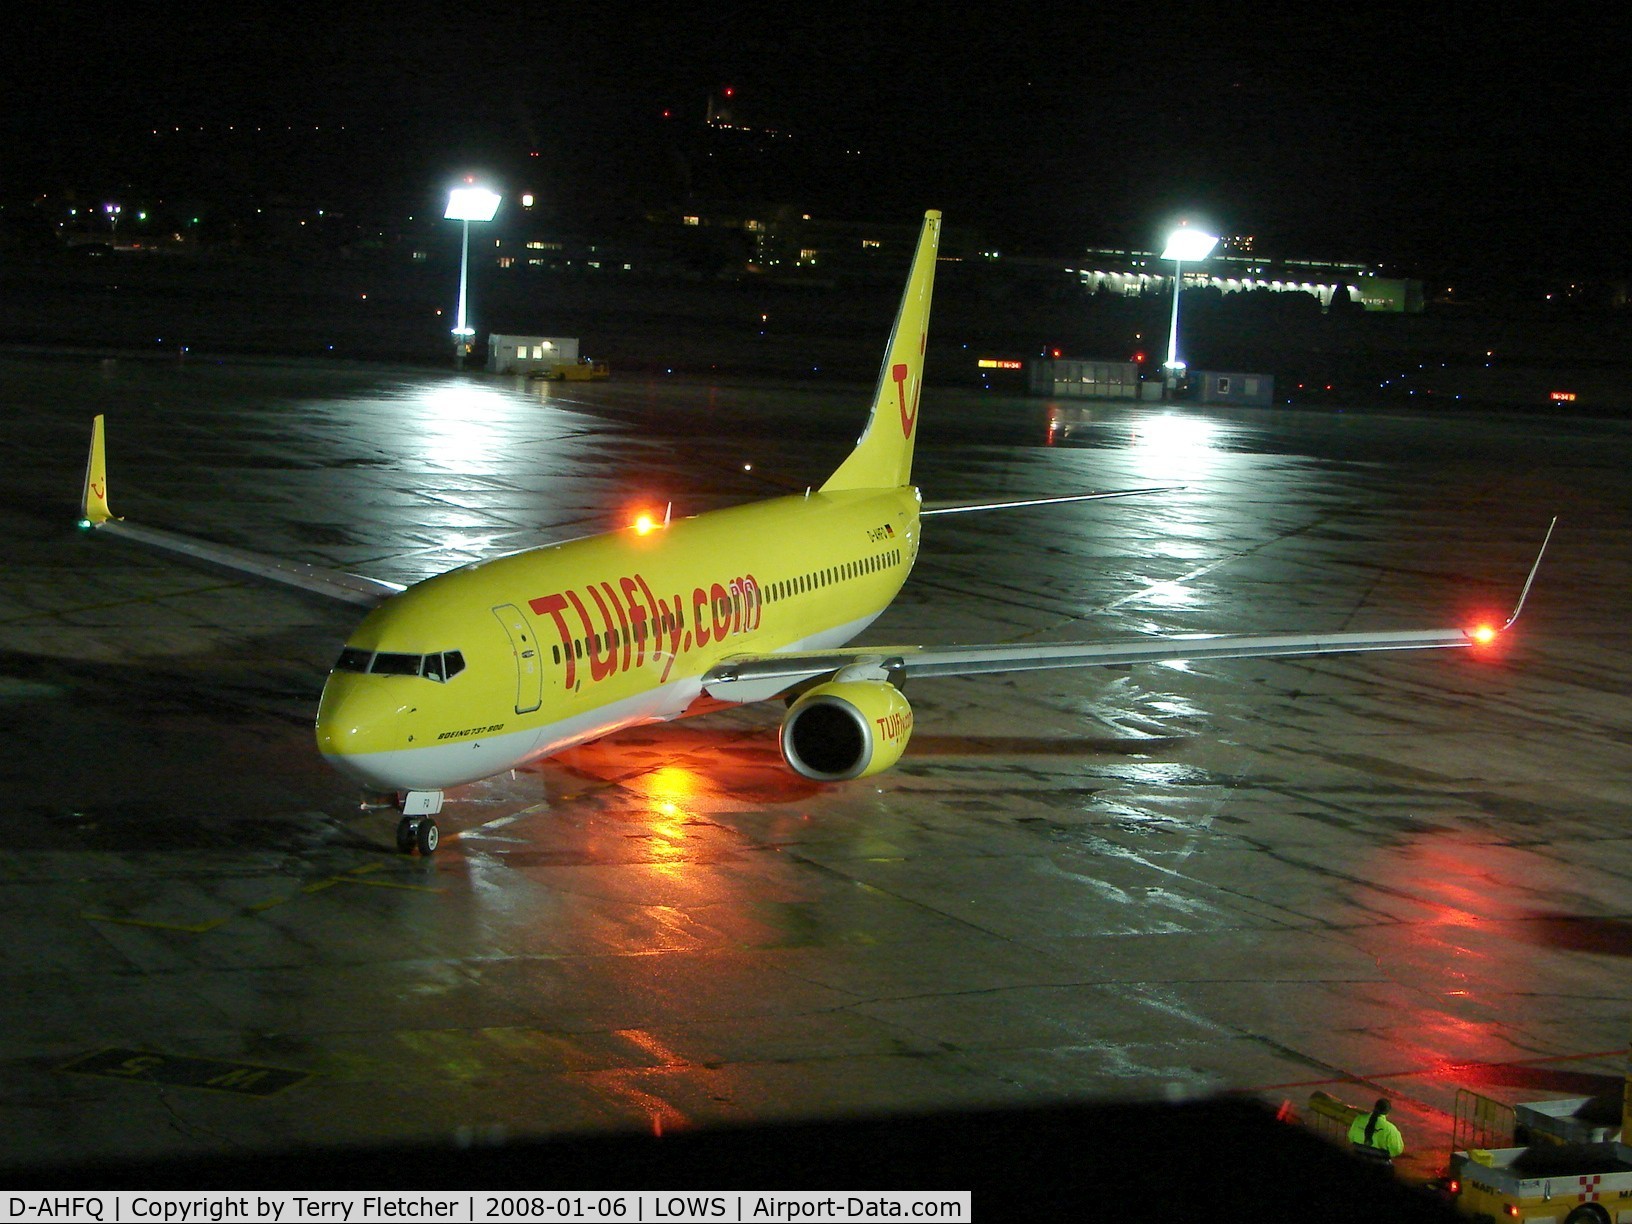 D-AHFQ, 2000 Boeing 737-8K5 C/N 27992, TUIfly's B737 de-iced and ready to taxi out from Salzburg